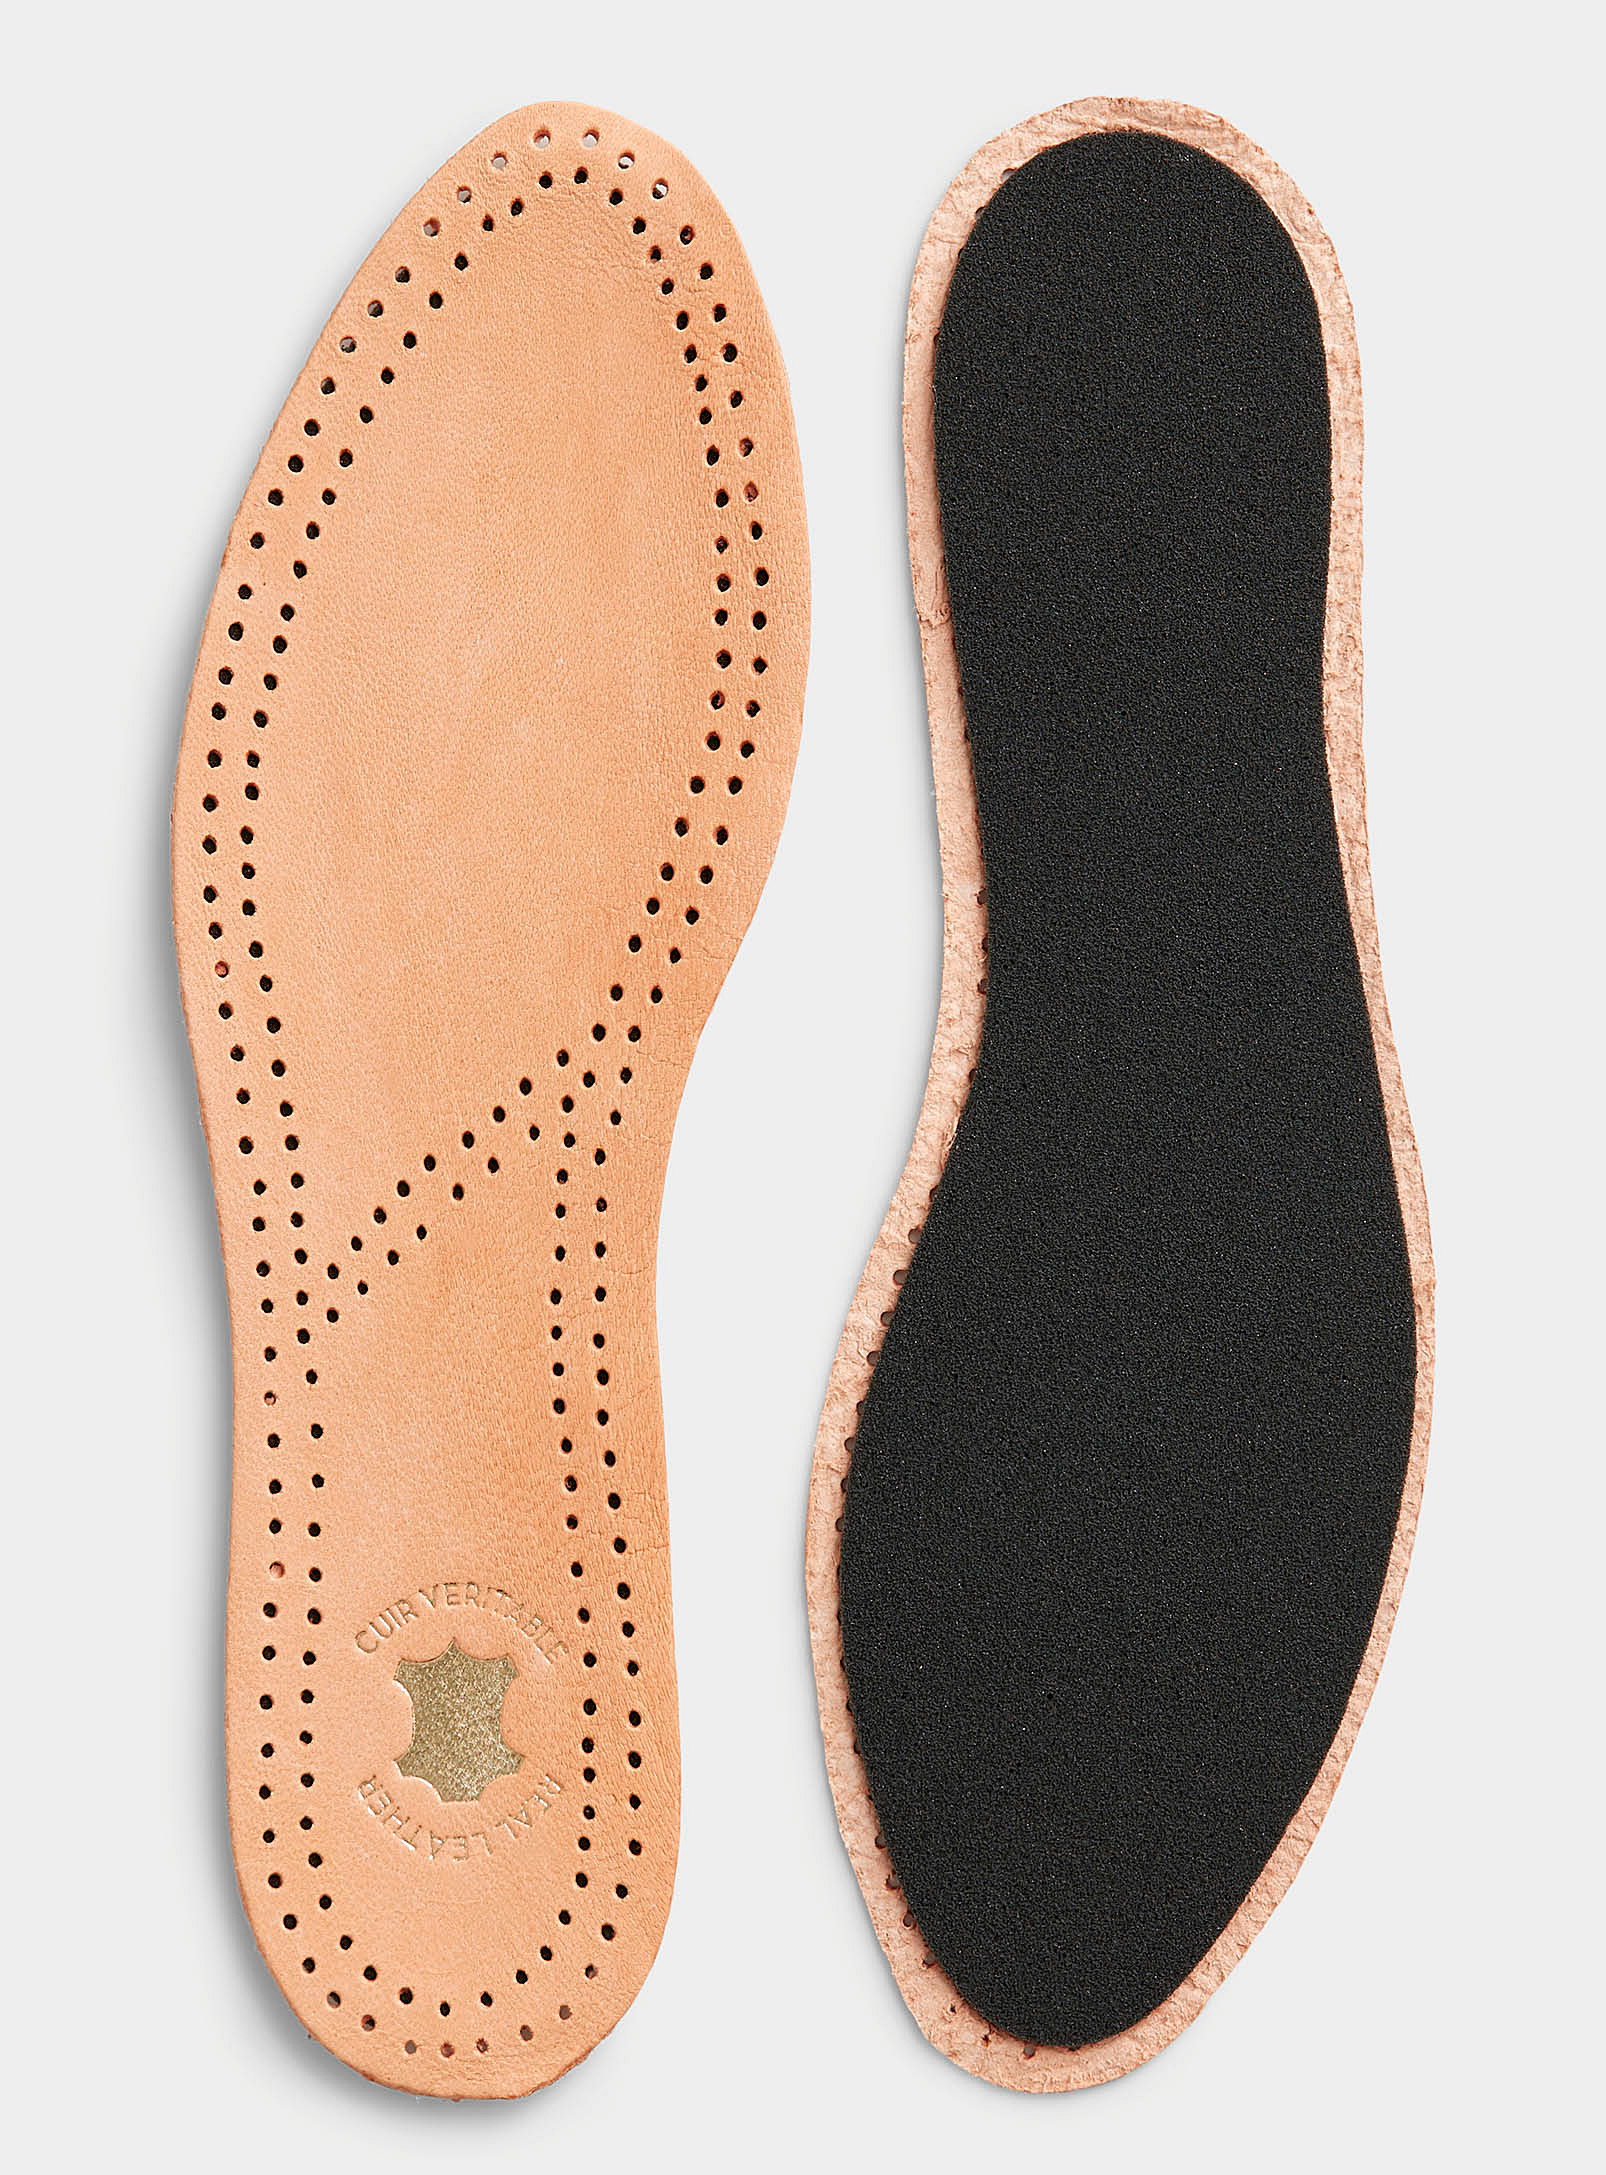 Walter's Genuine Leather Insole In Tan